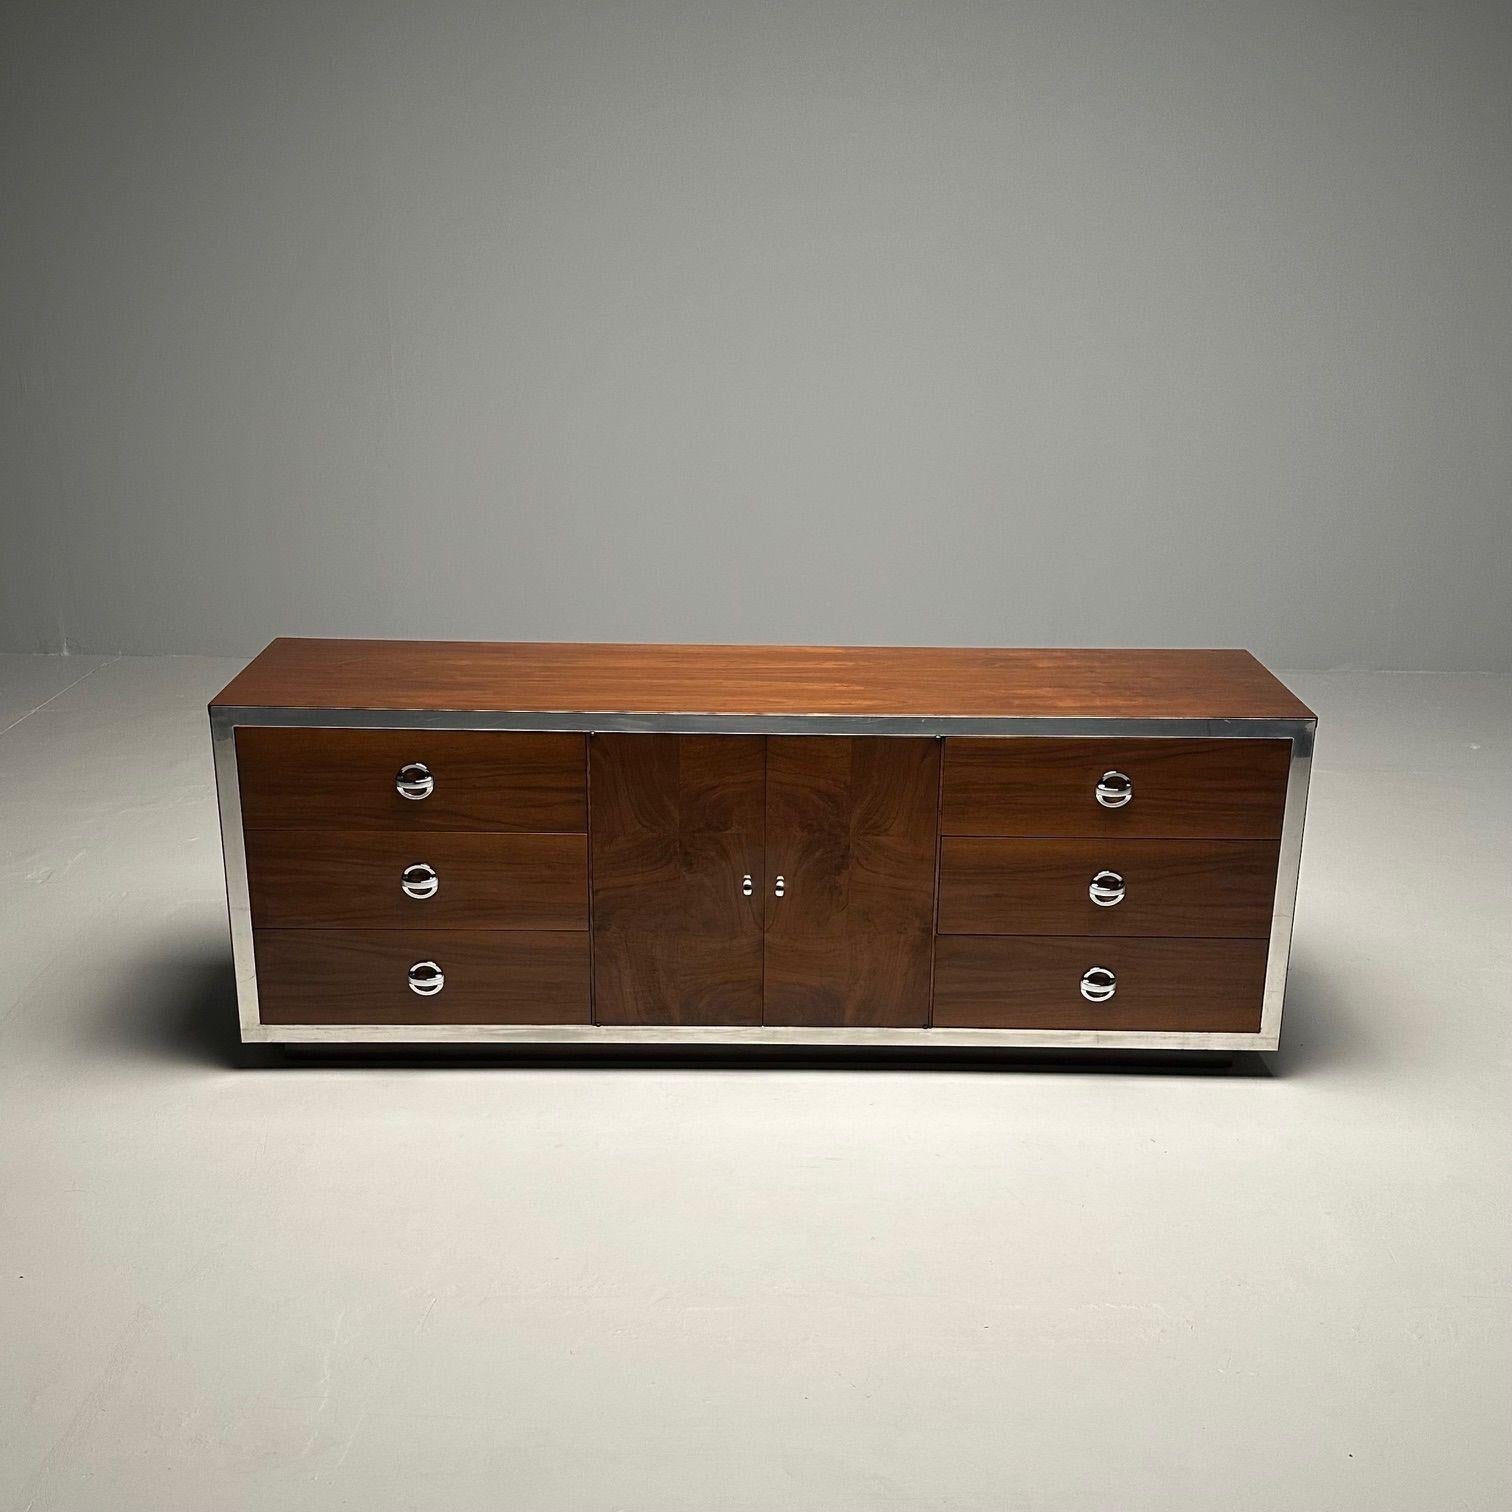 Mid-Century Modern Dresser / Sideboard by Milo Baughman, Chrome, Walnut

This fine rosewood style veneer fronts having chrome pulls with chrome framed borders. Each having a fitted interior. Available as a compatible pair as well as with two